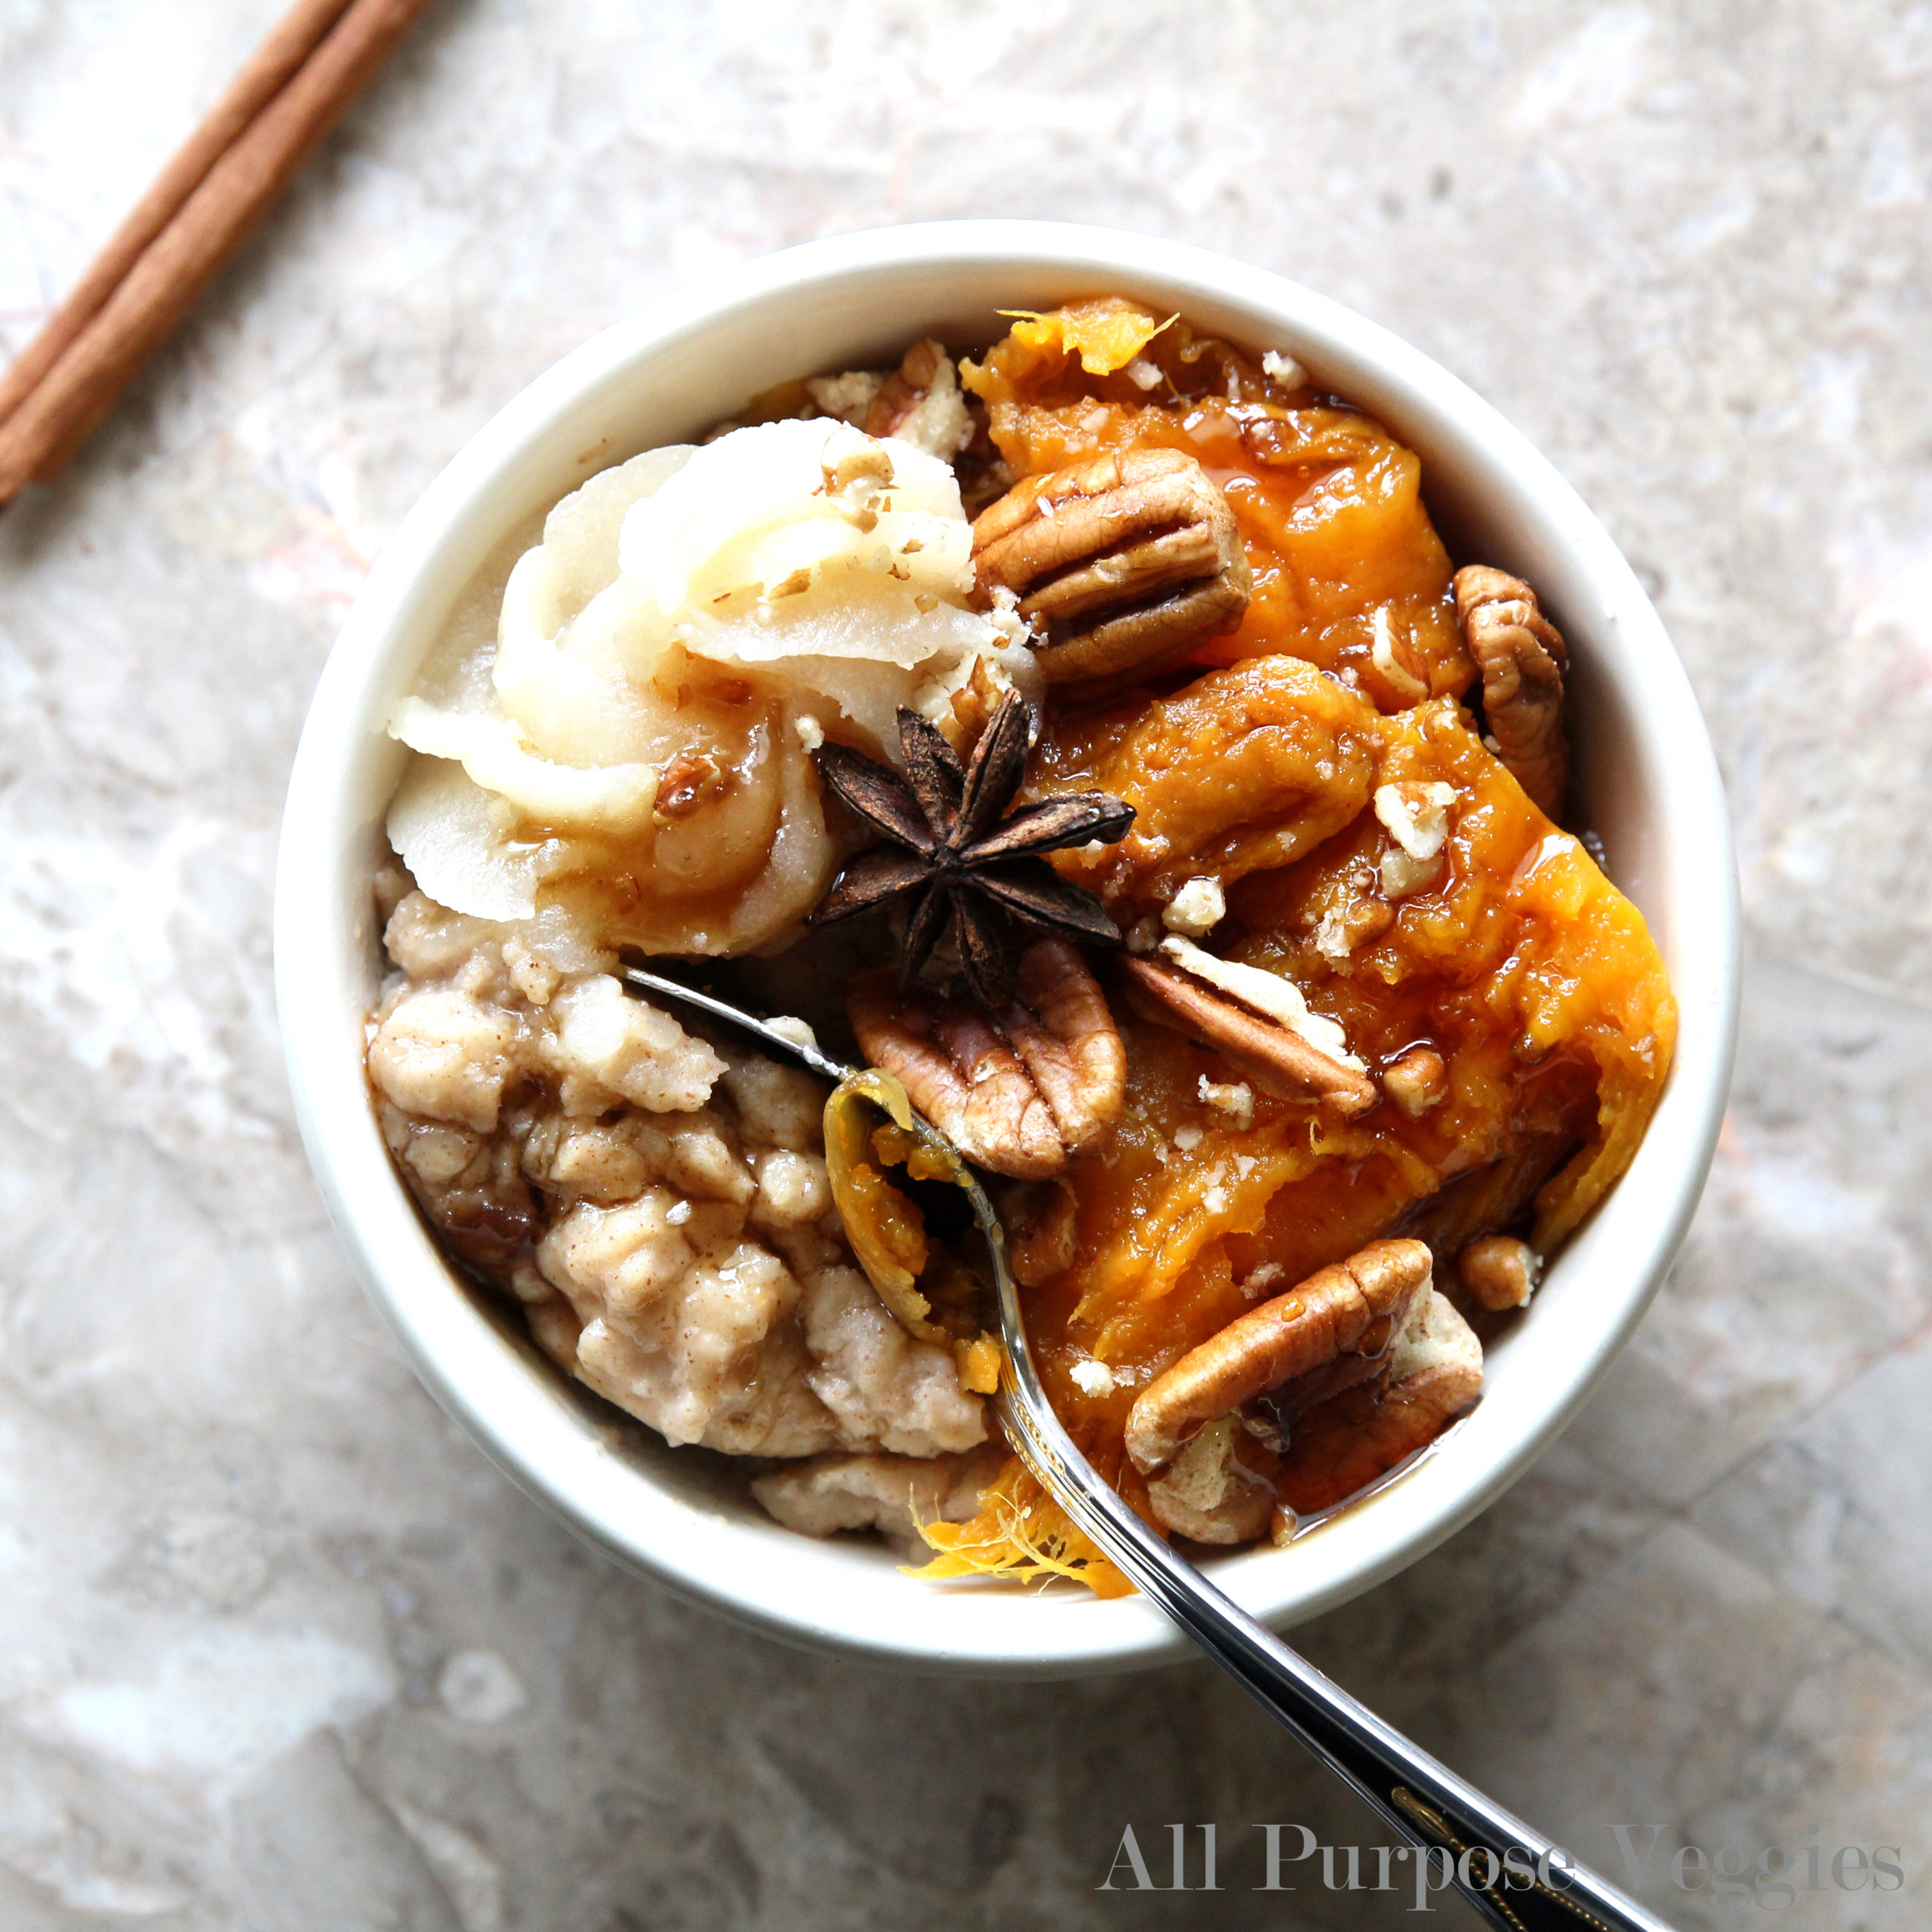 Almond Butter Oatmeal with Sweet Potato & Pecan - Blueberry Banana Bread